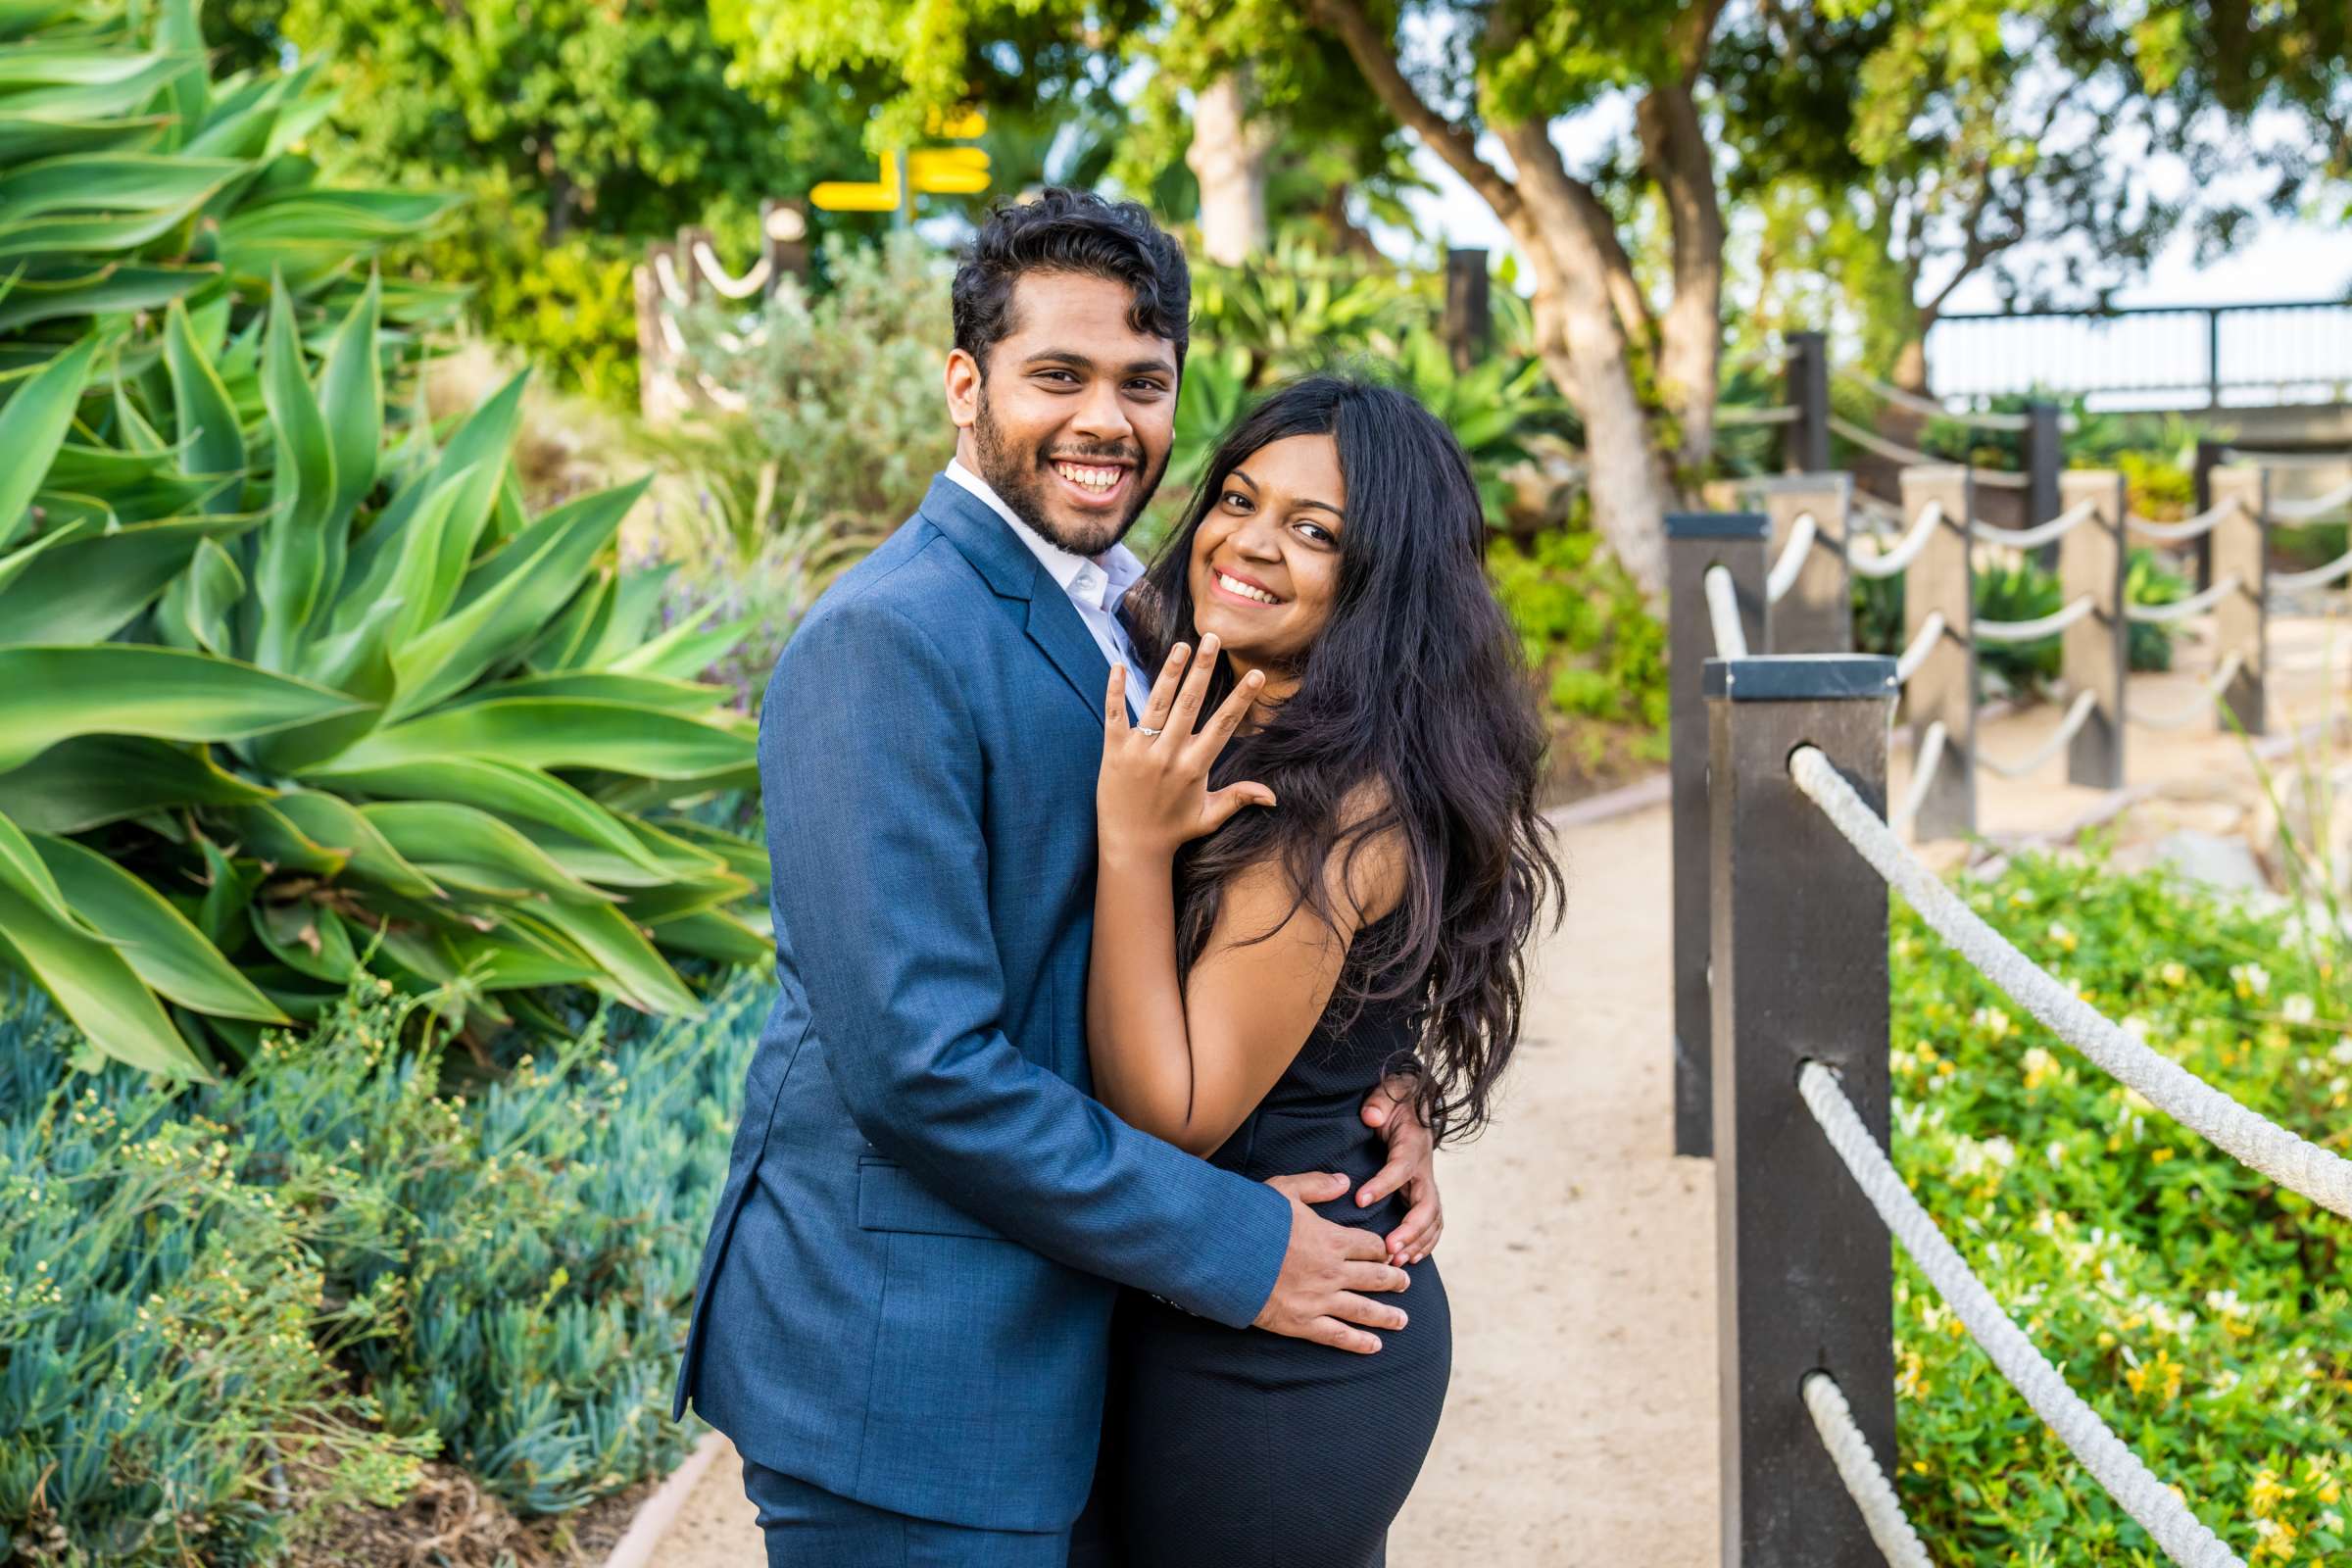 Black Swan Weddings Proposal, Sneha and Abhijeet Proposal Photo #2 by True Photography